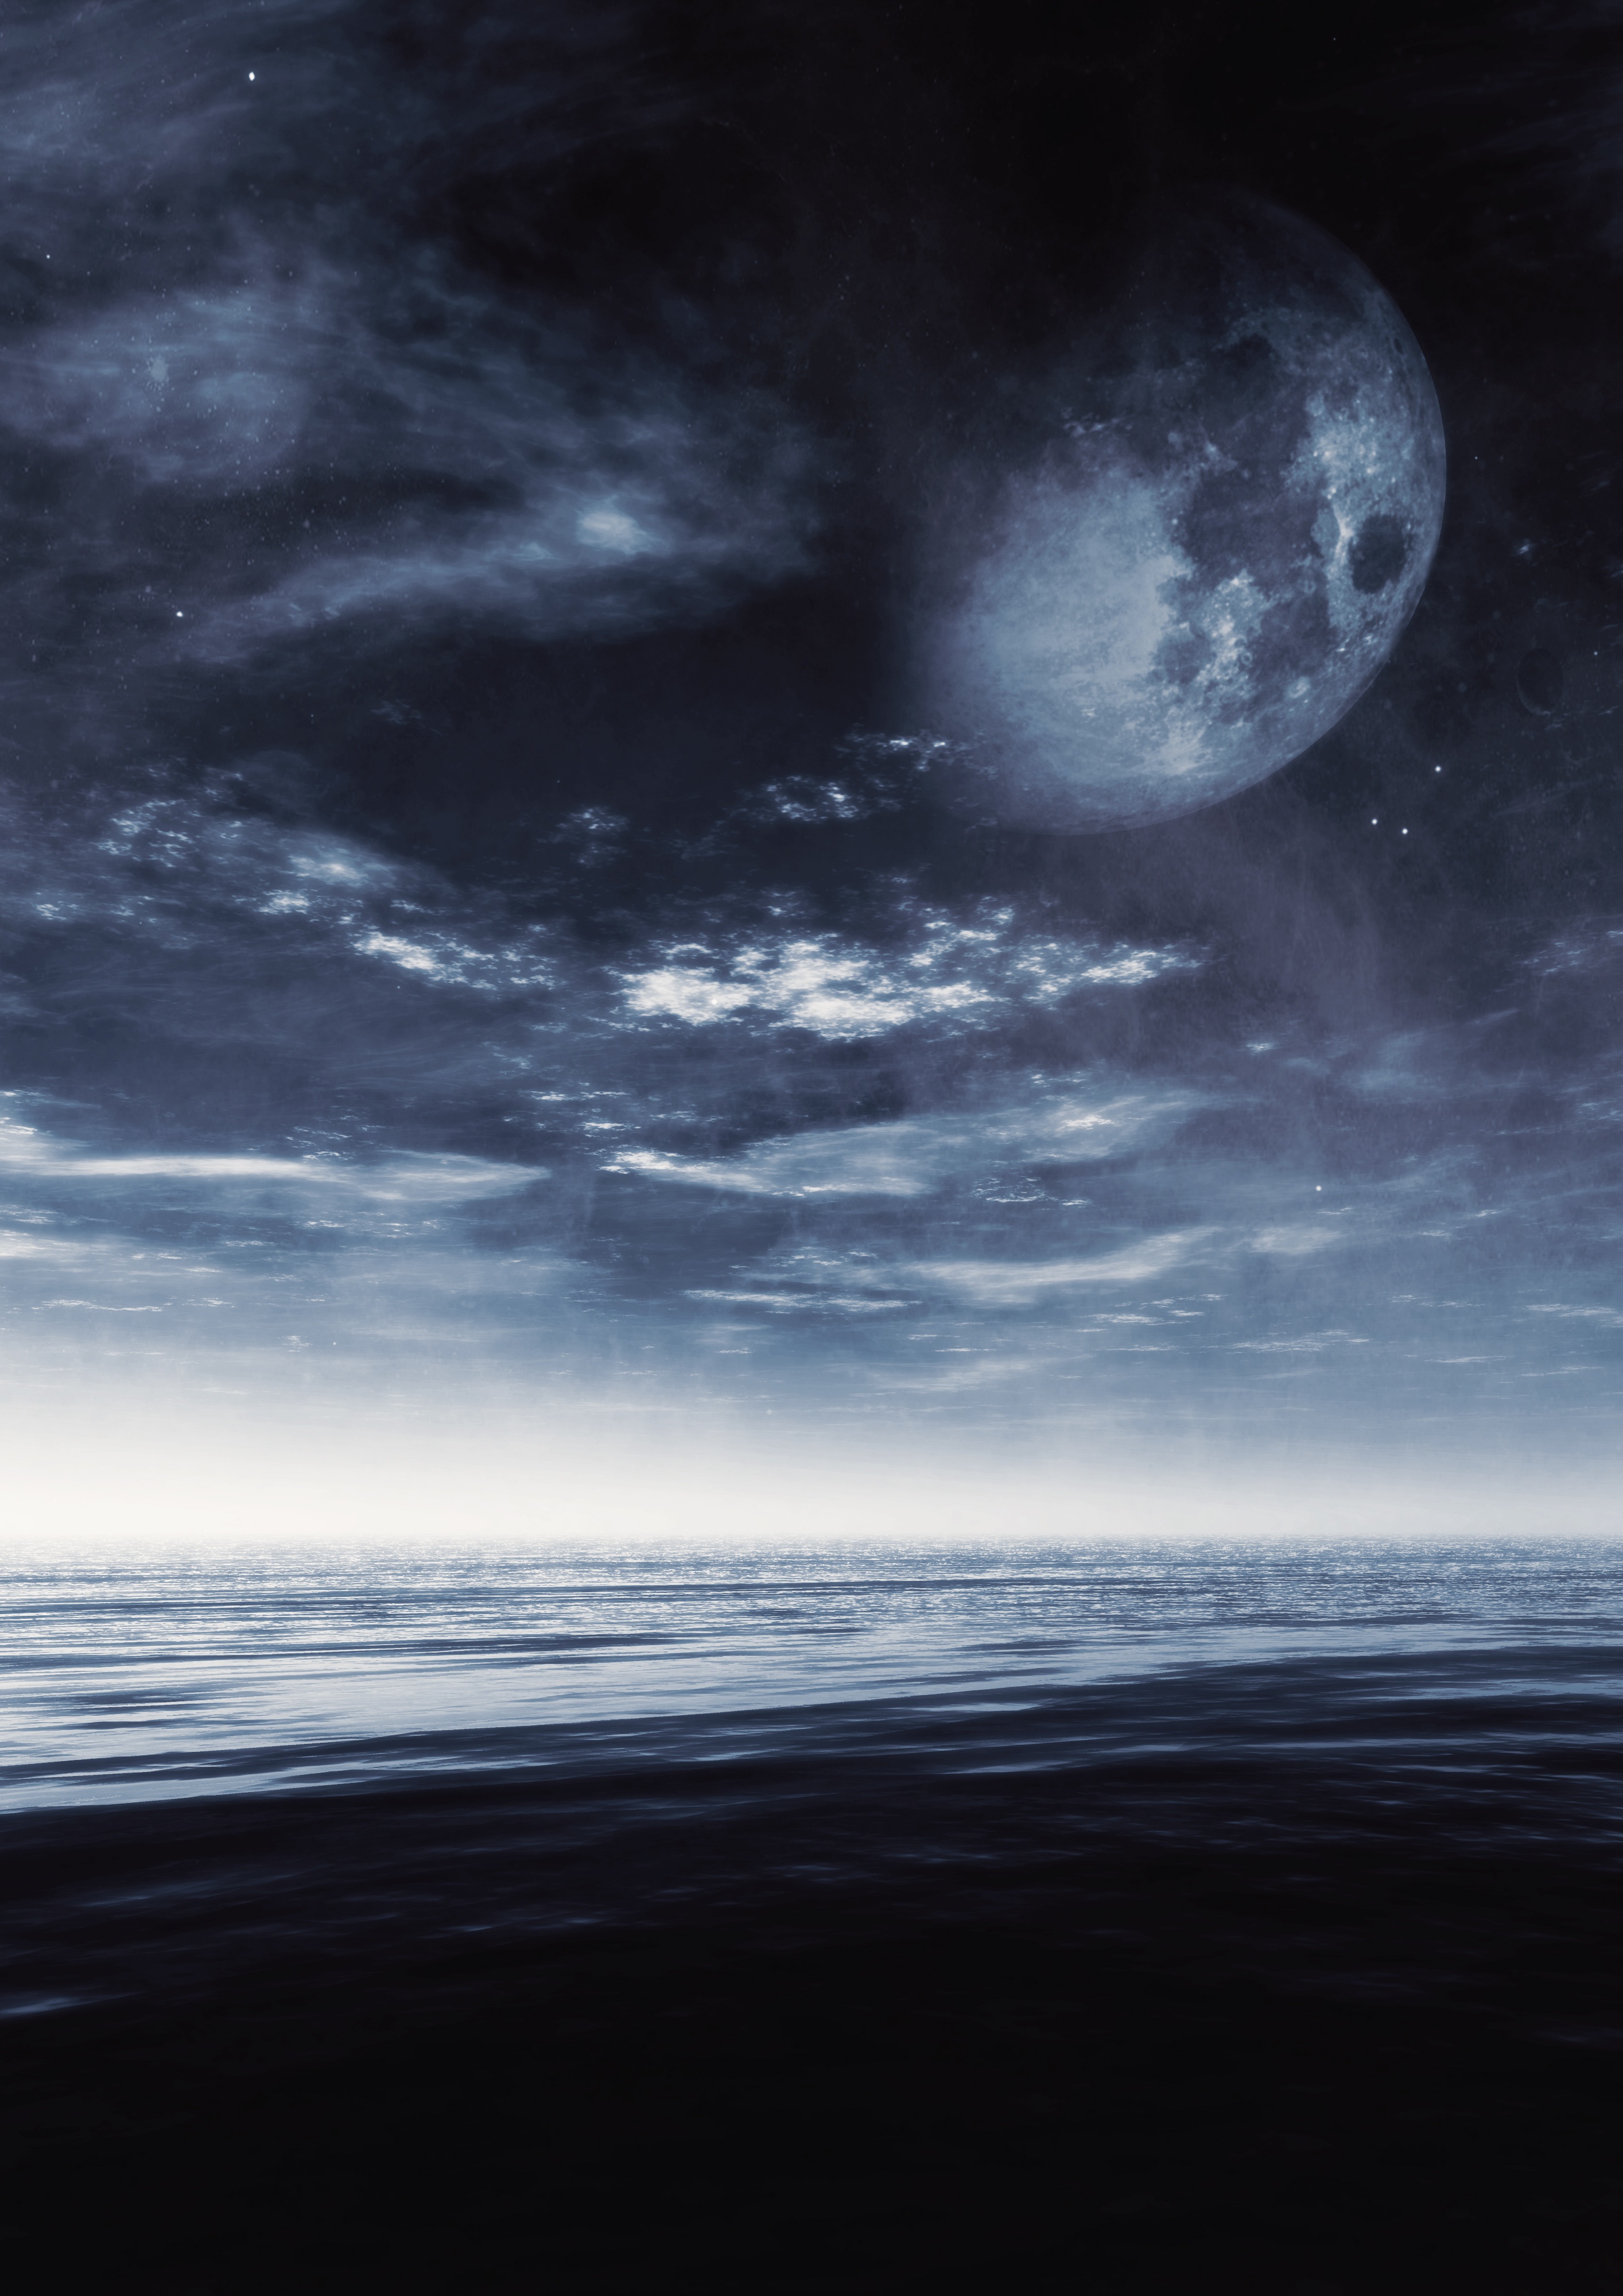 102806 download wallpaper moon, nature, sea, horizon, photoshop, gloomy, shroud screensavers and pictures for free